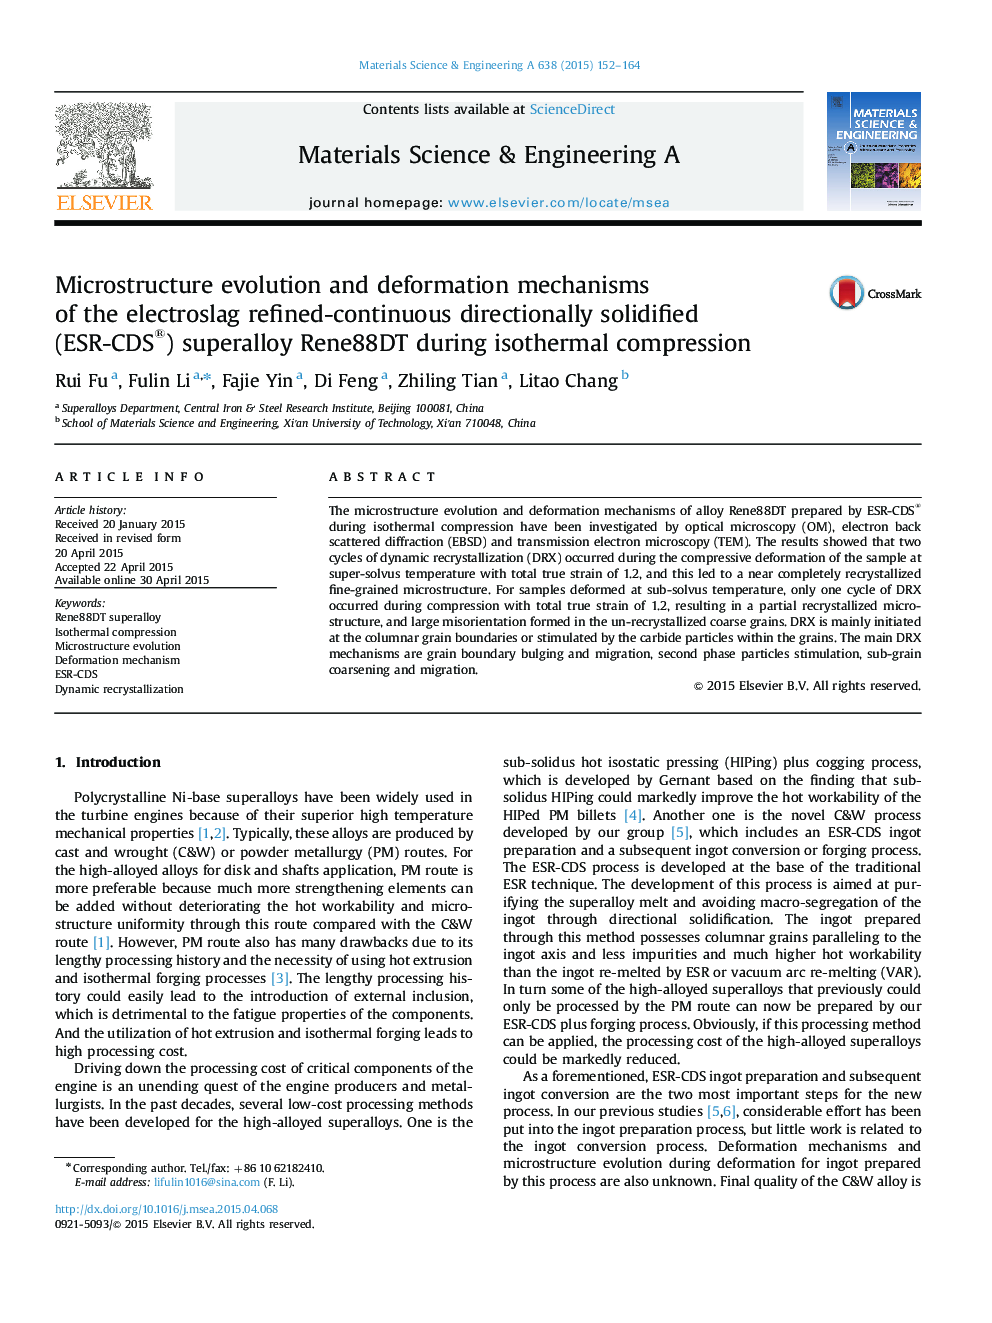 Microstructure evolution and deformation mechanisms of the electroslag refined-continuous directionally solidified (ESR-CDS®) superalloy Rene88DT during isothermal compression